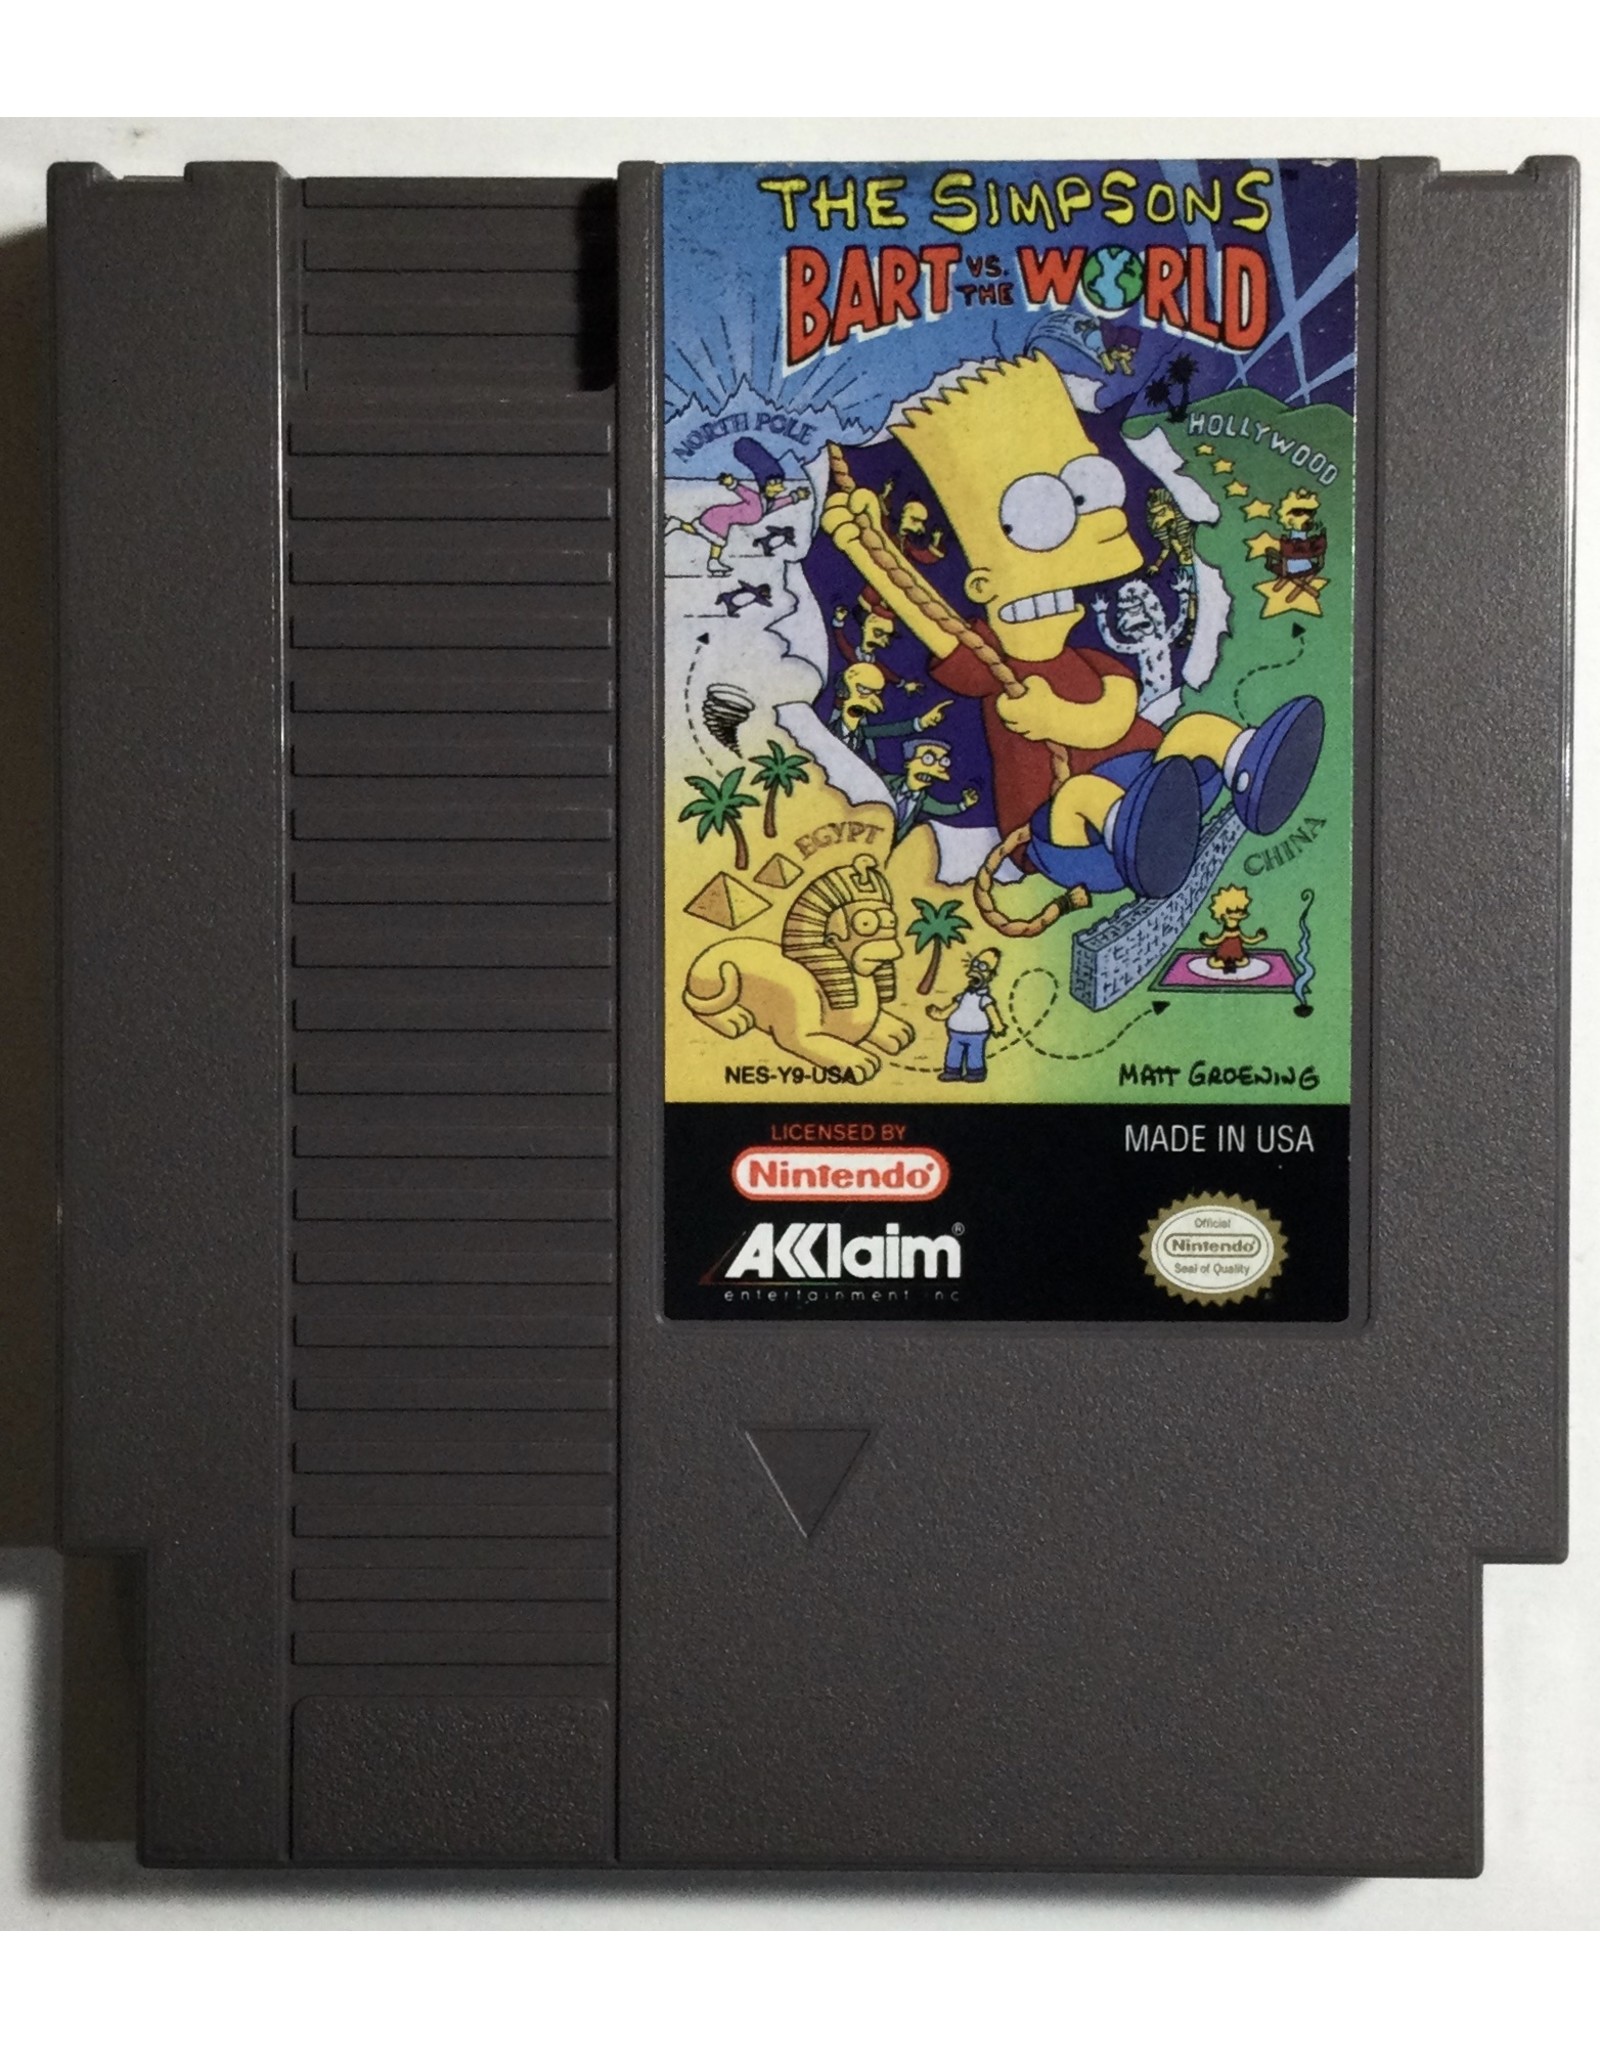 ACCLAIM The Simpsons Bart vs the World for Nintendo Entertainment System (NES)